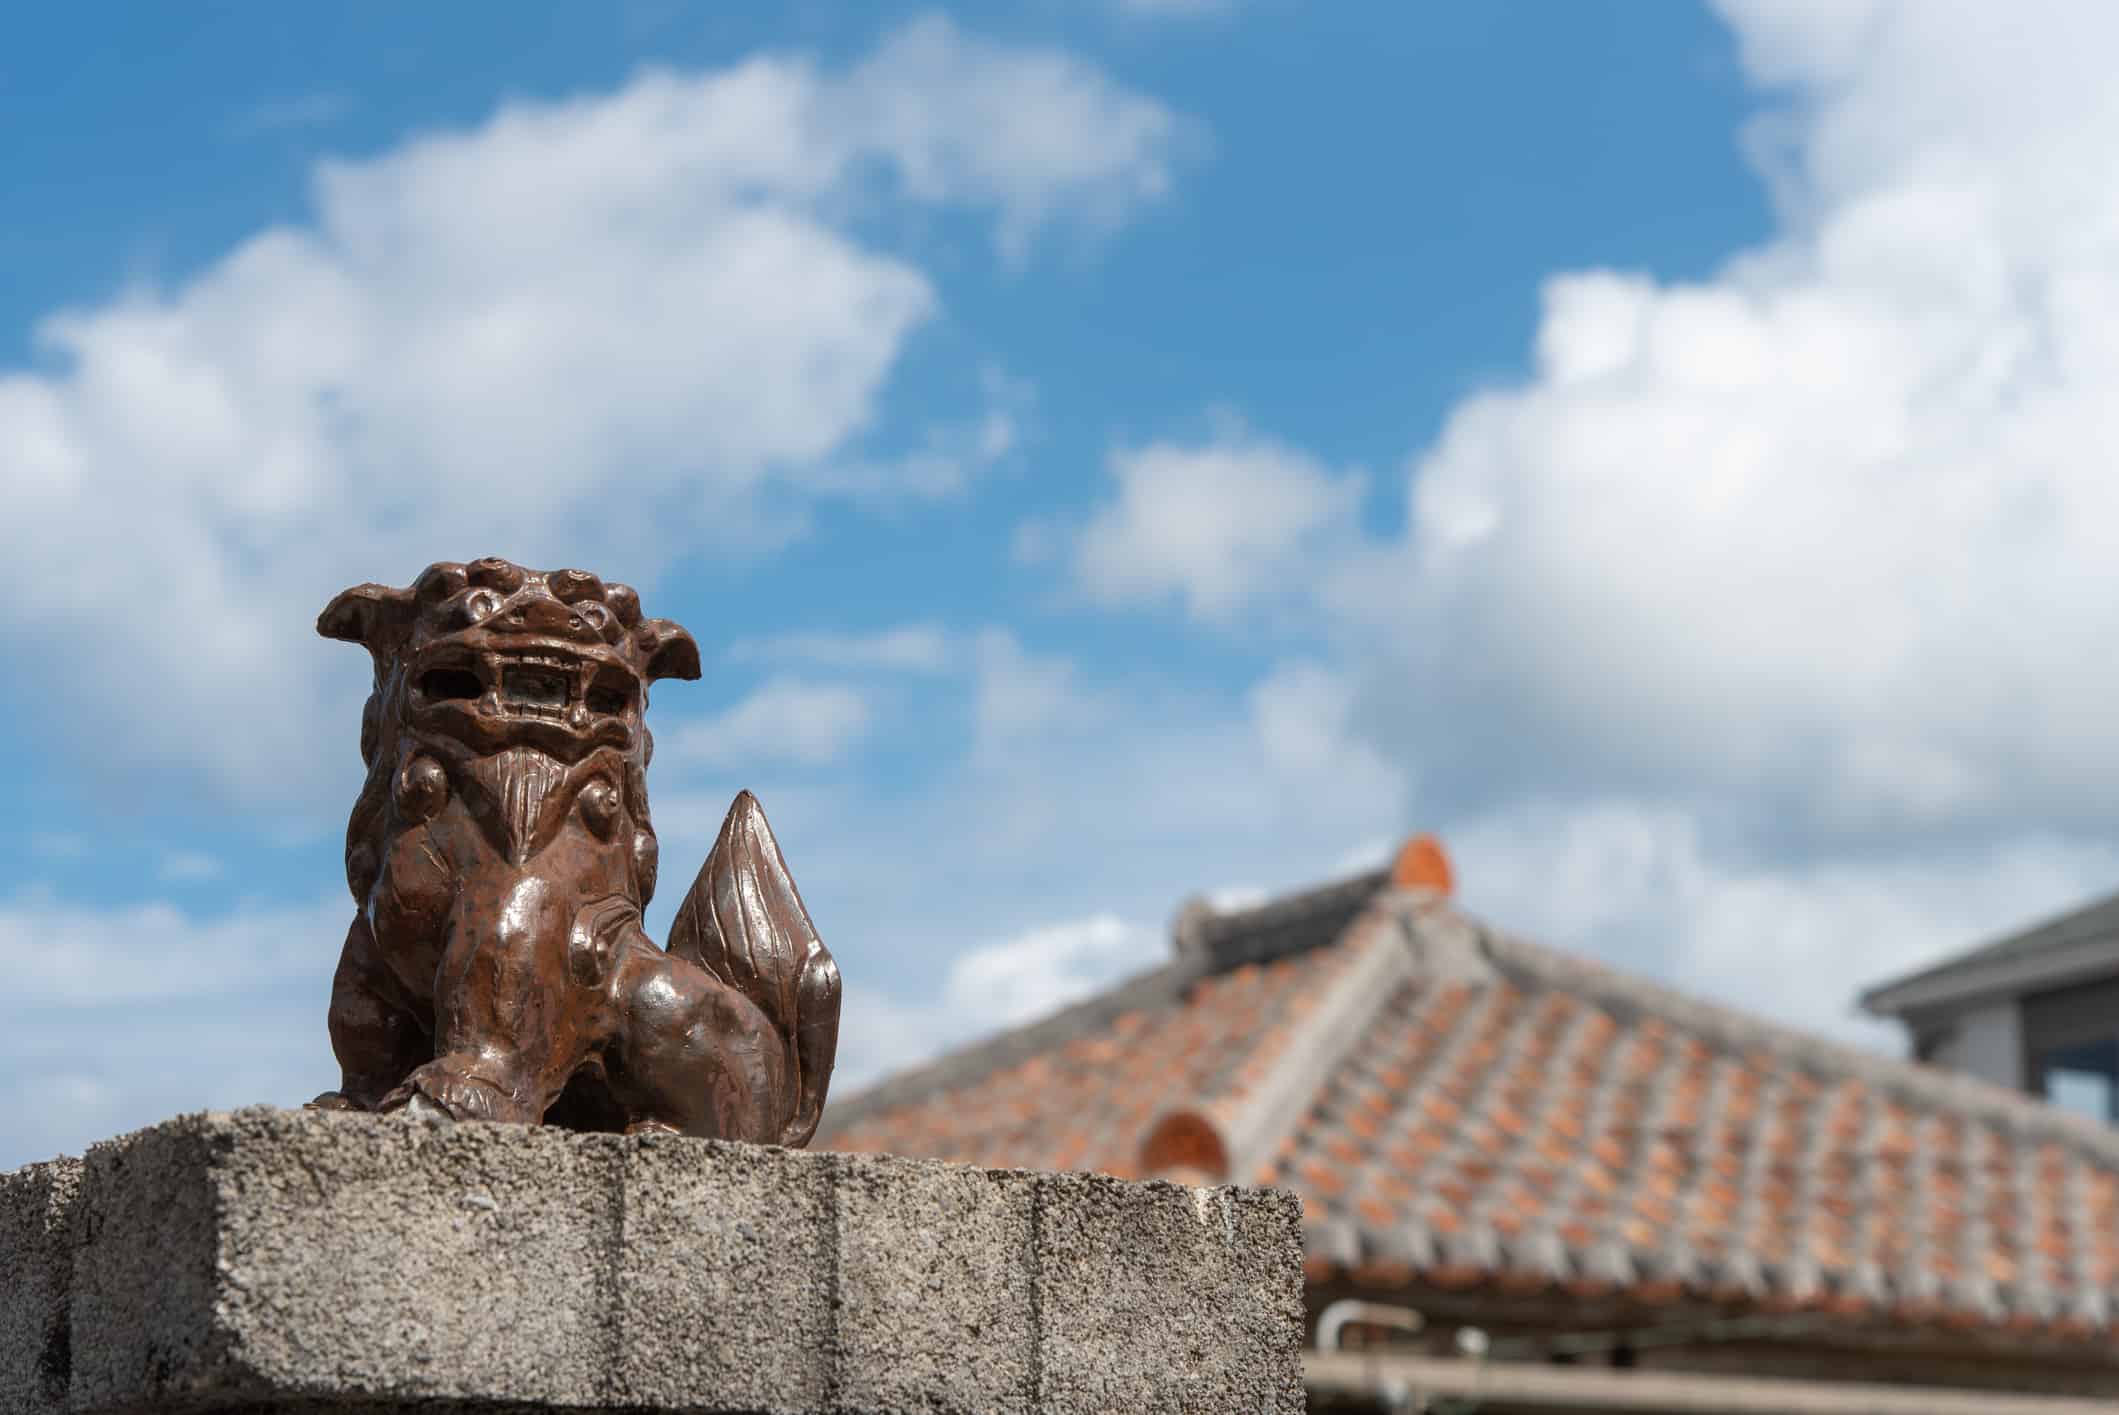 Okinawa's shisa talisman and the roof of an old folk house